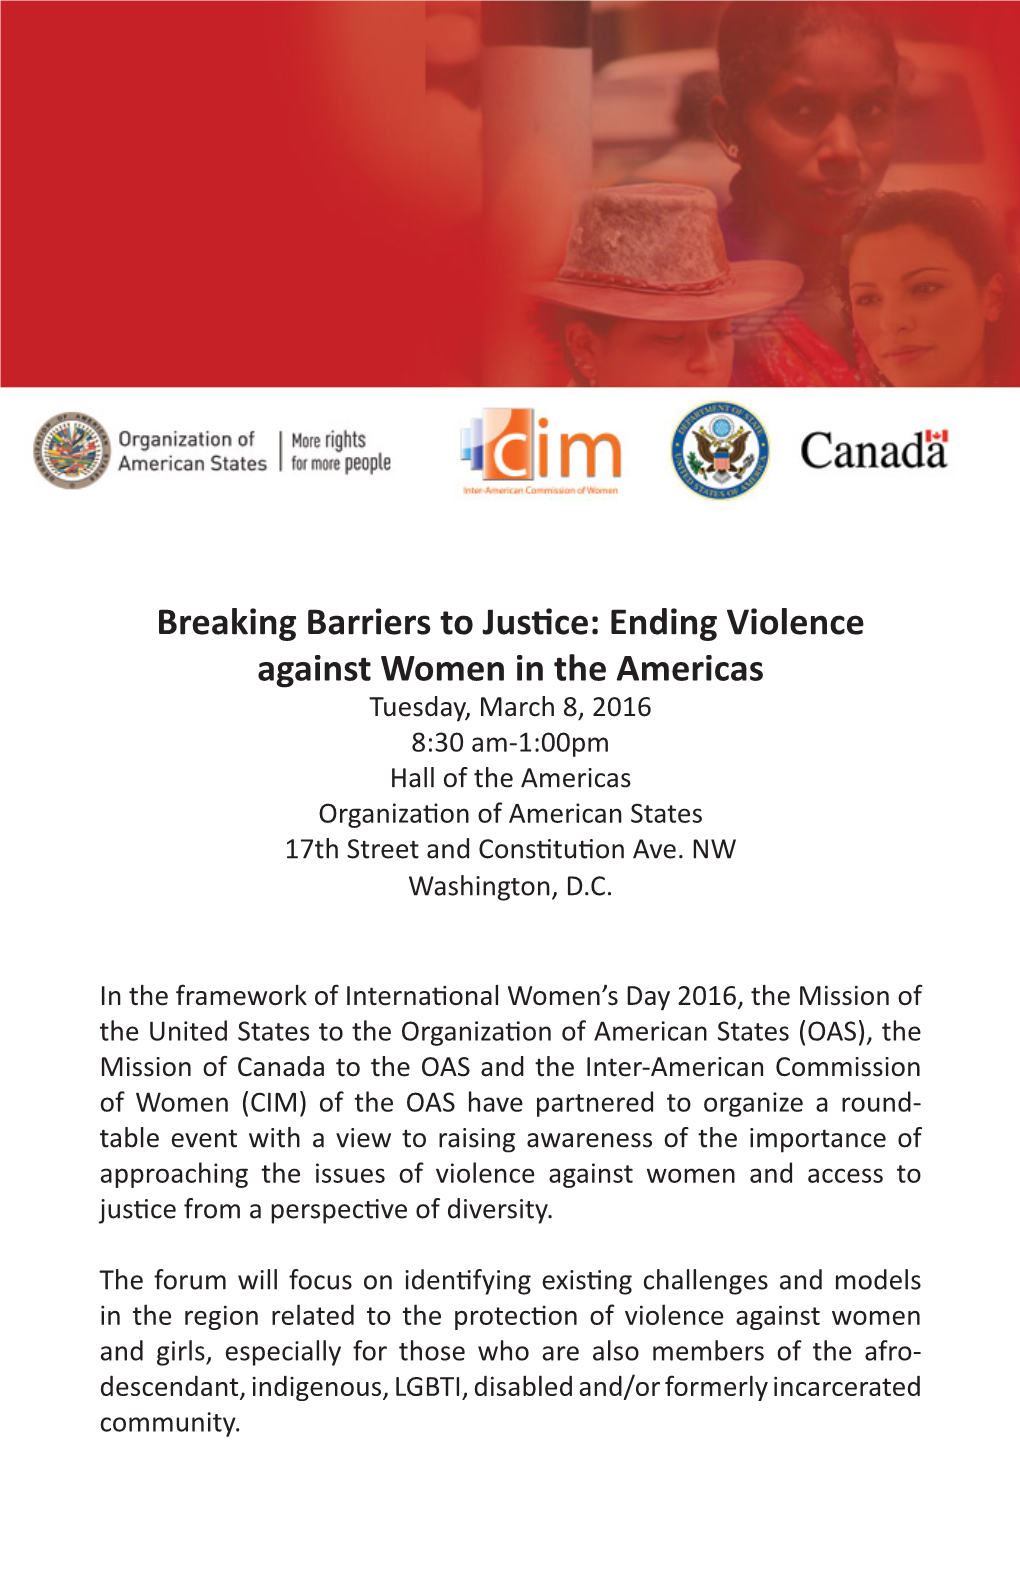 Ending Violence Against Women in the Americas